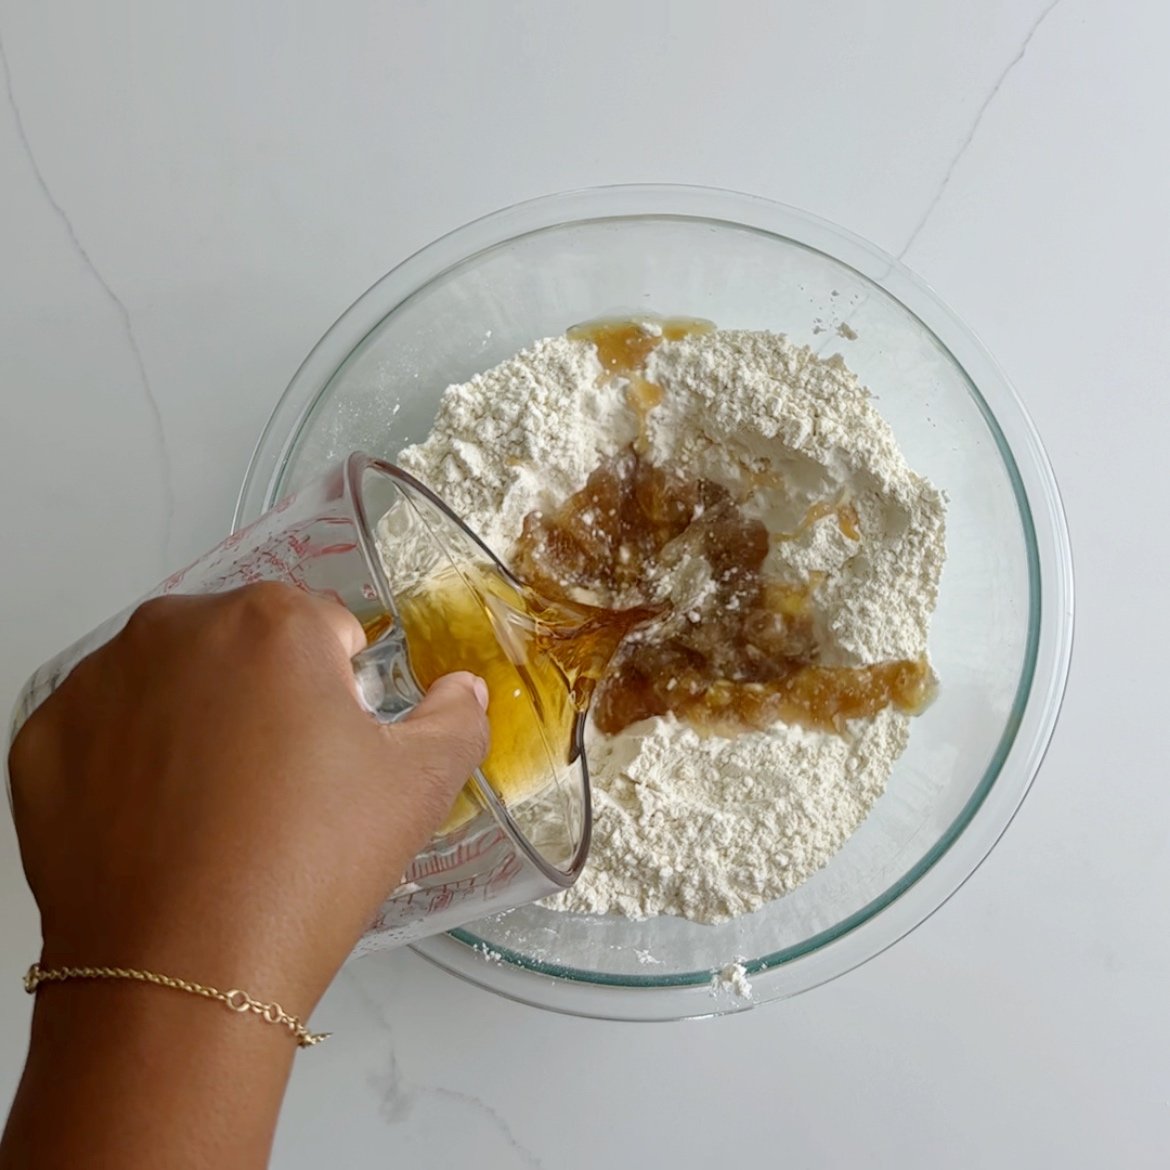 forming a well in the center of the flour mixture